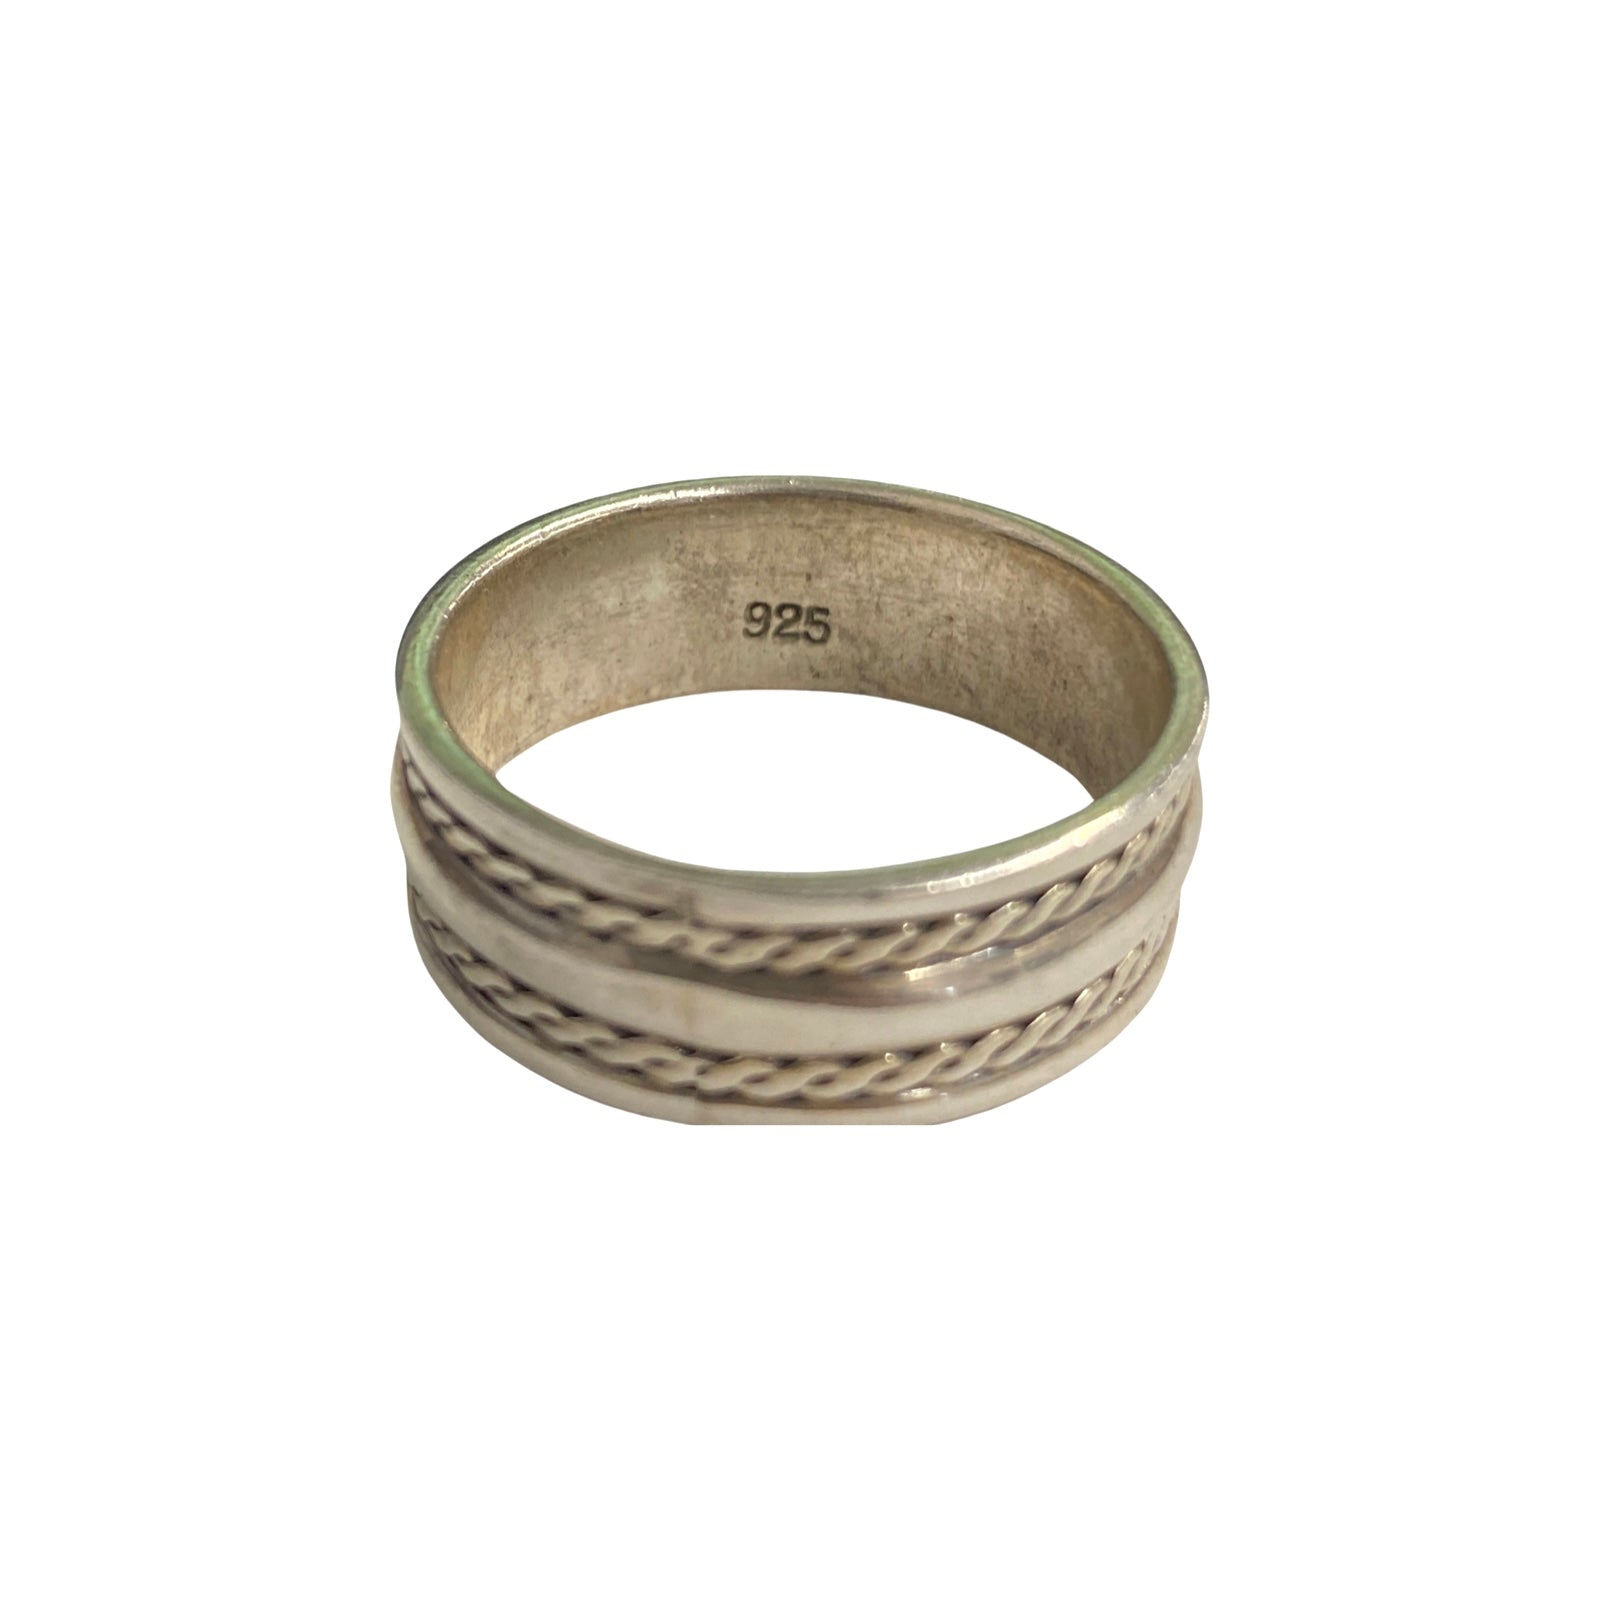 Sterling Silver Braided Band Ring